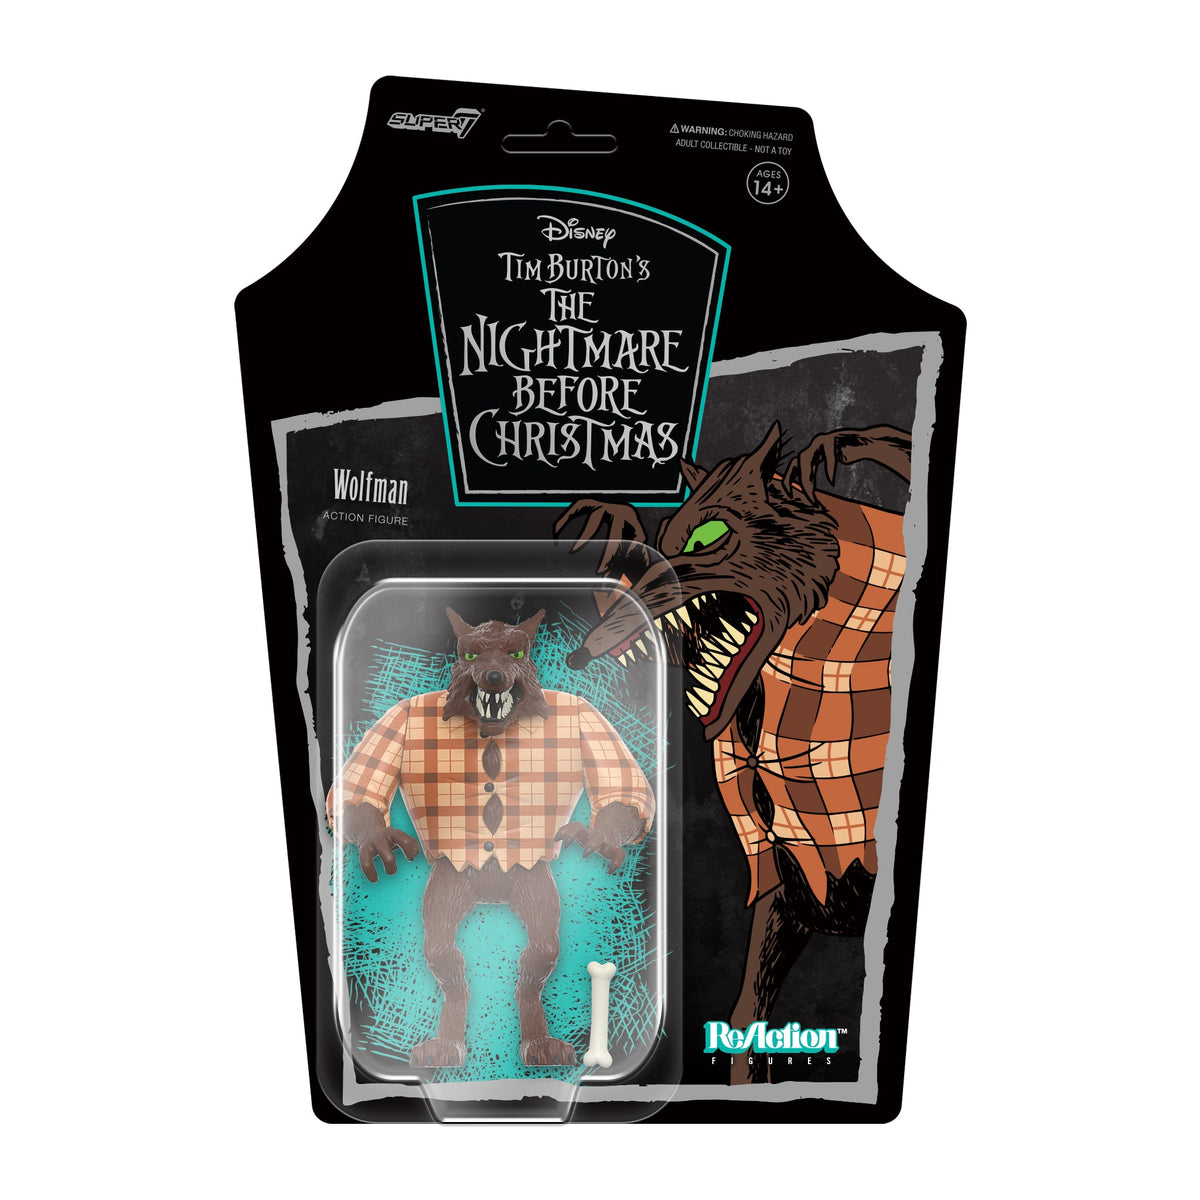 The Nightmare Before Christmas: 3.75" Wolfman ReAction Collectible Action Figure w/ Bone